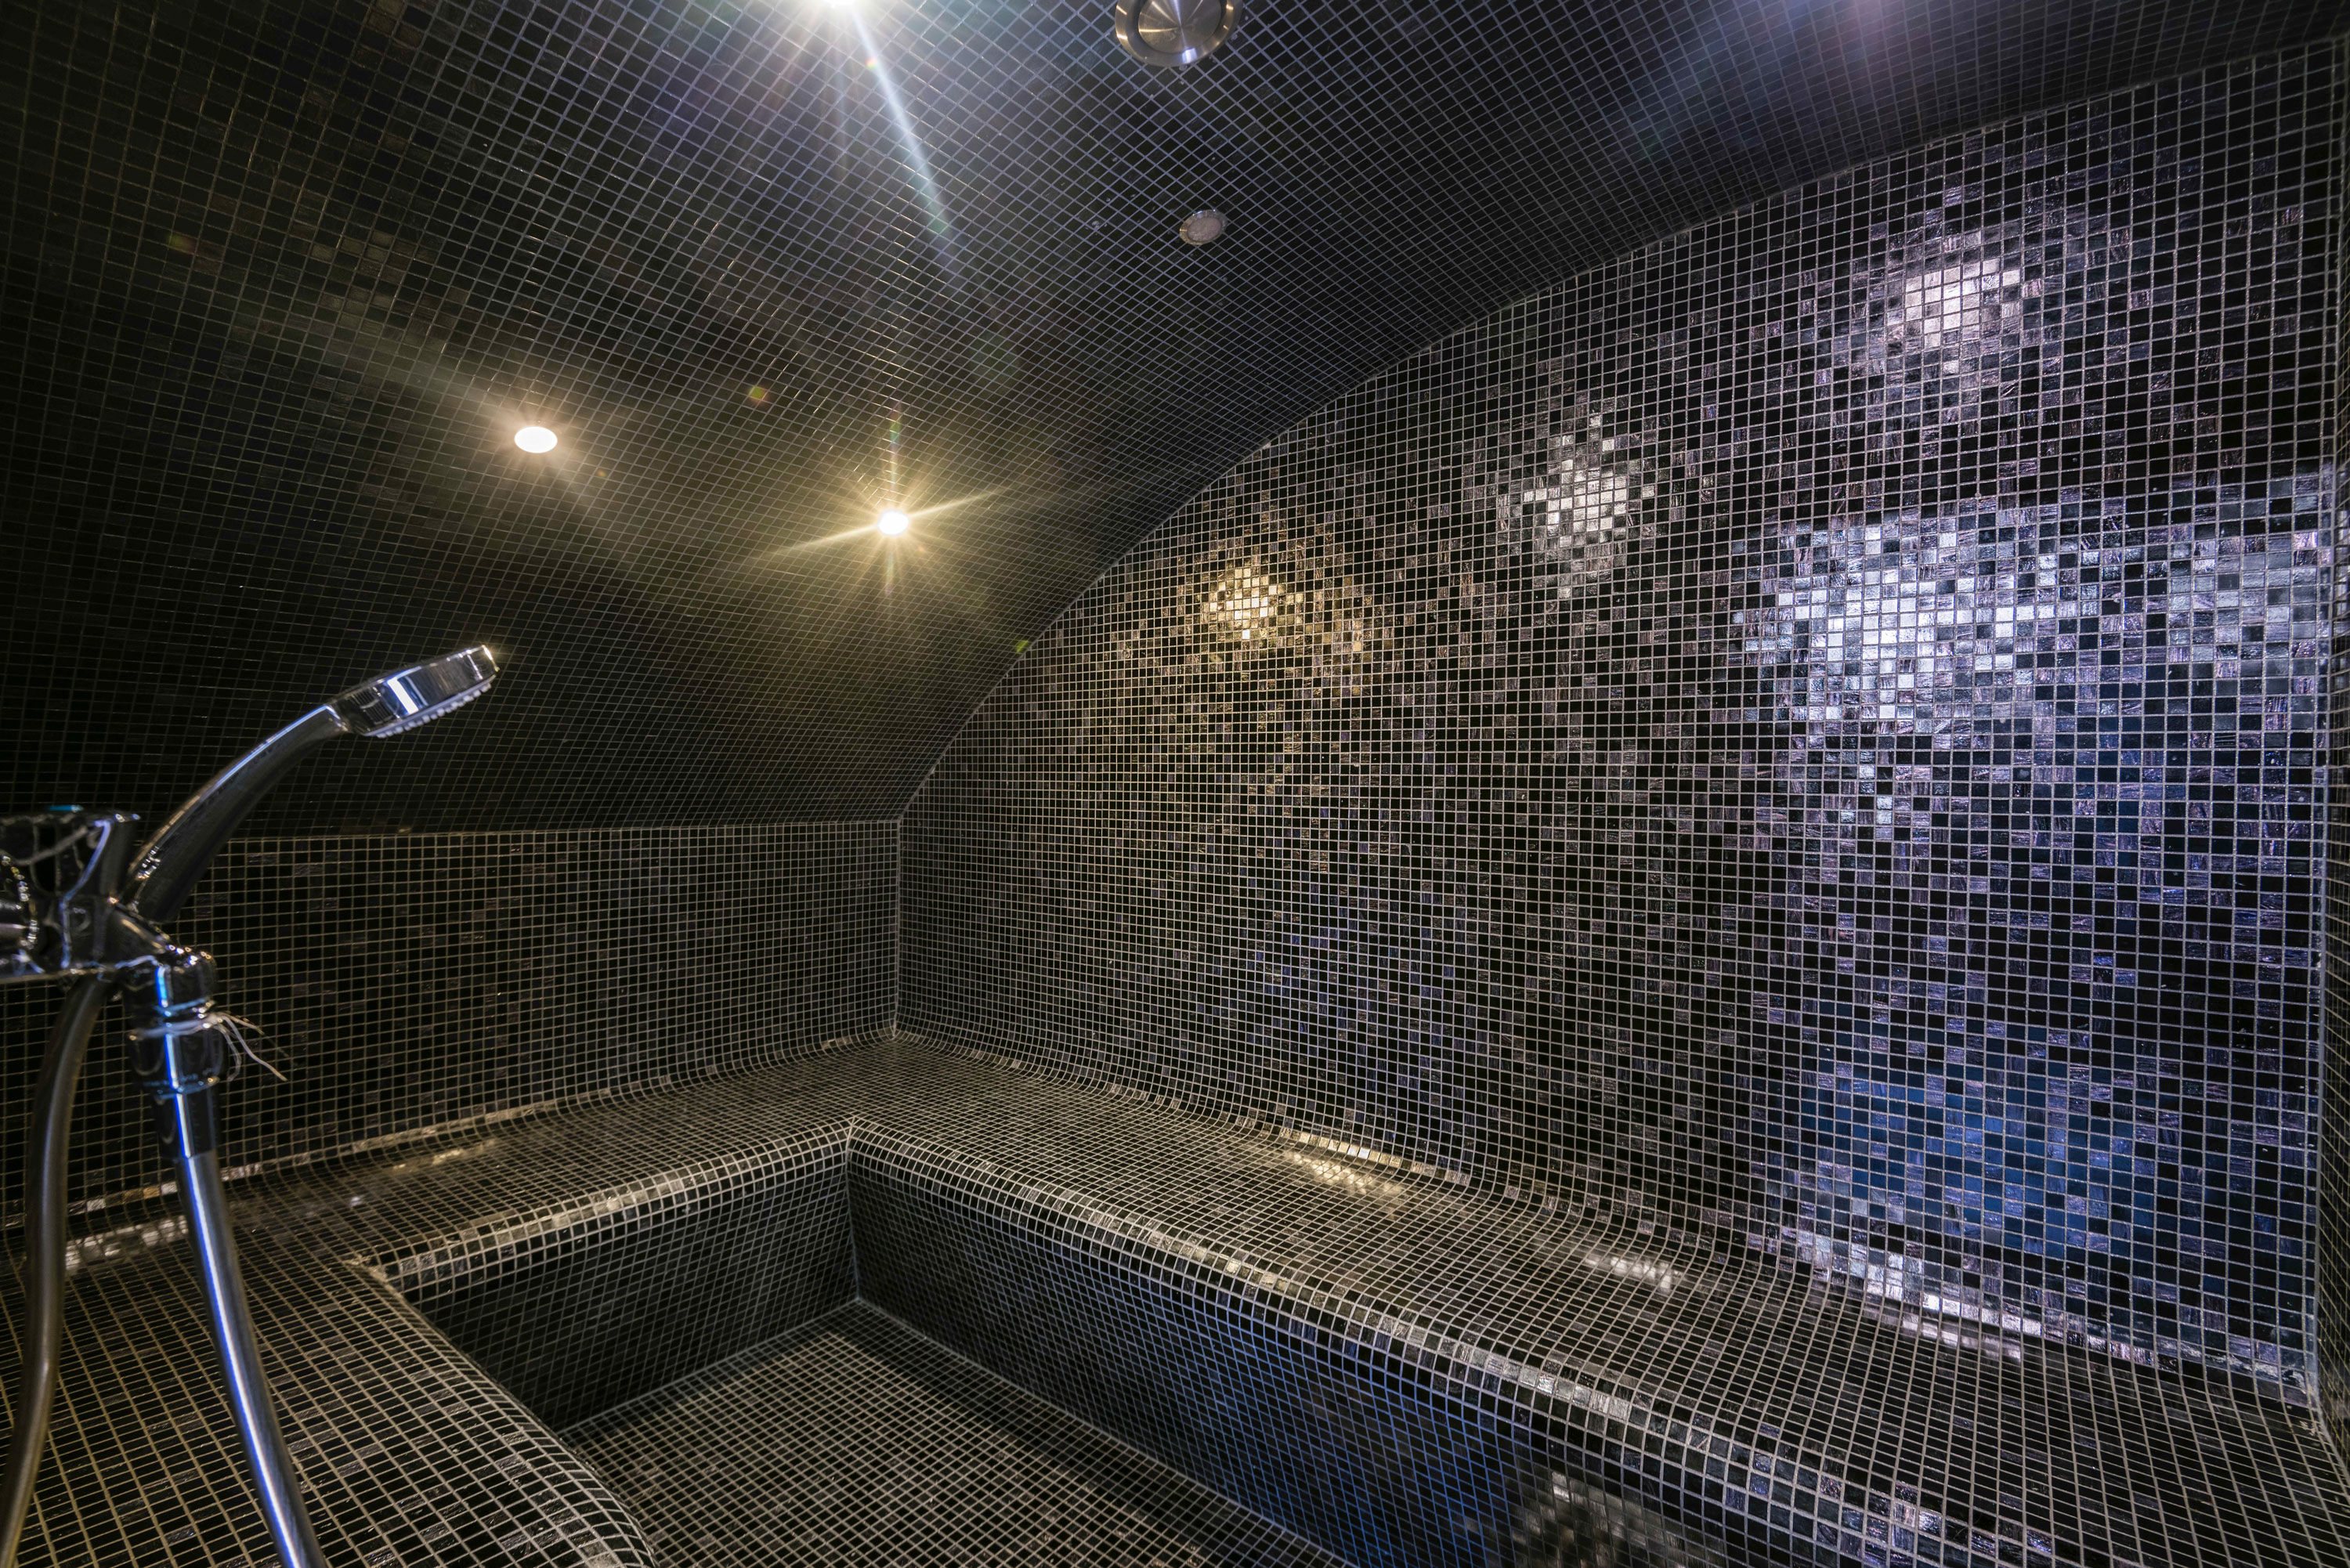 Room with shower and black tiles